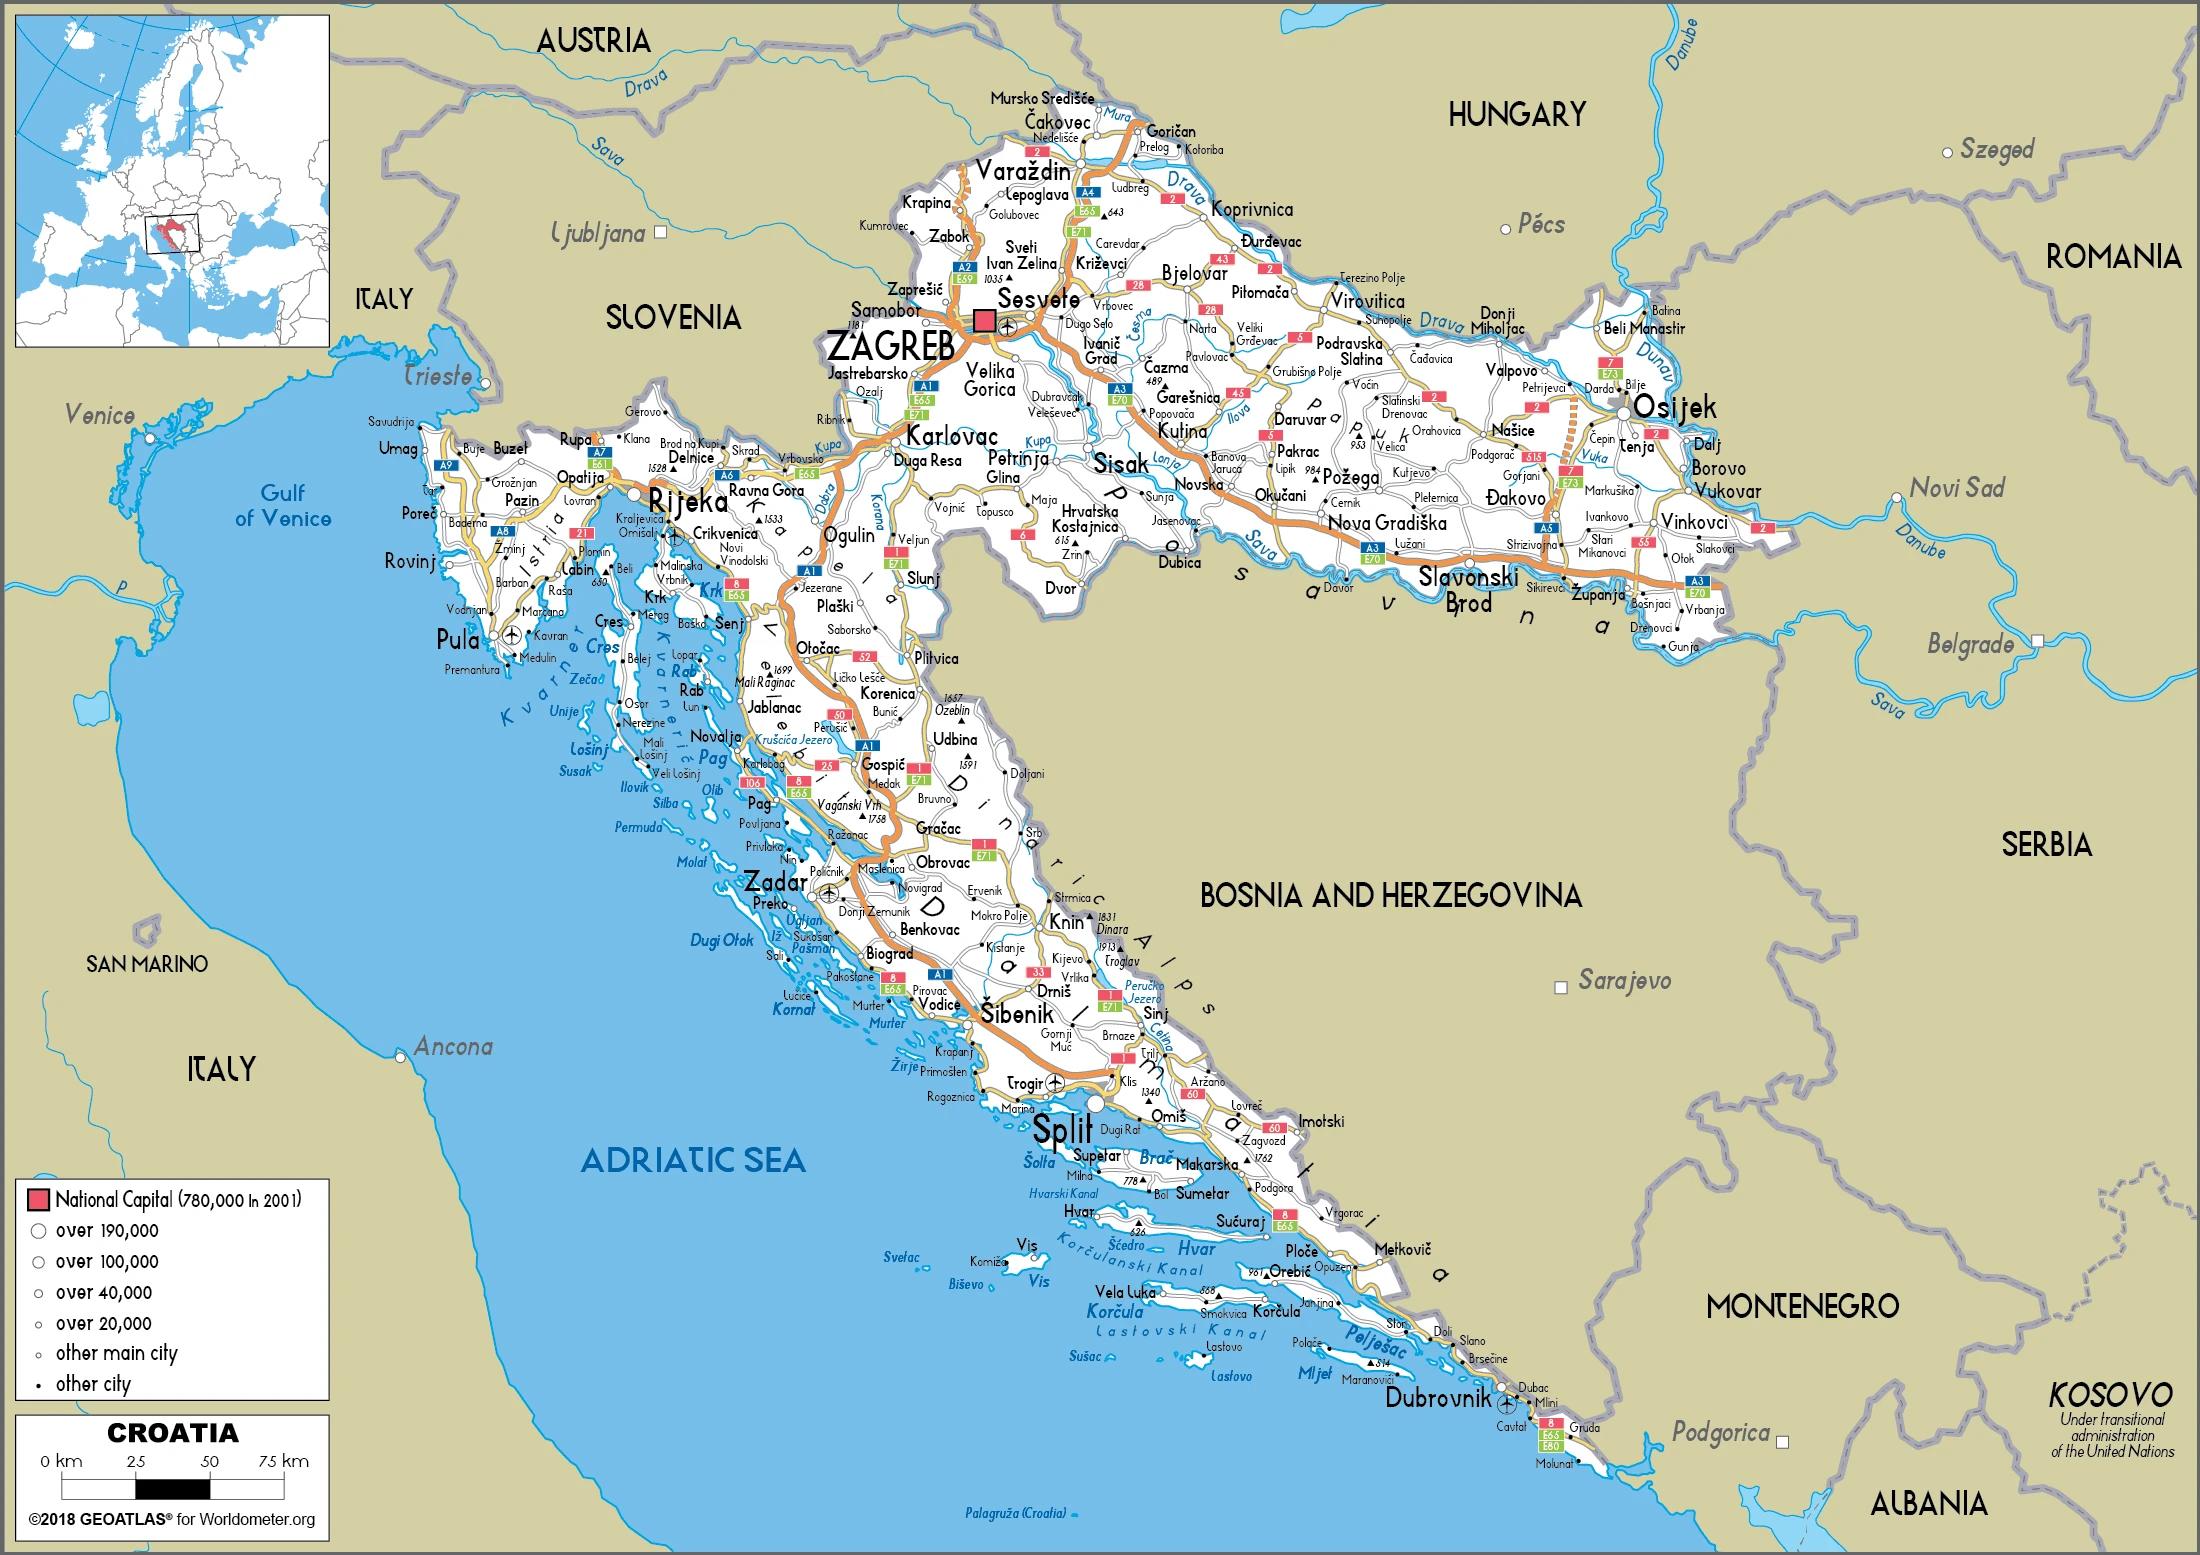 The route plan of the Croatian roadways.